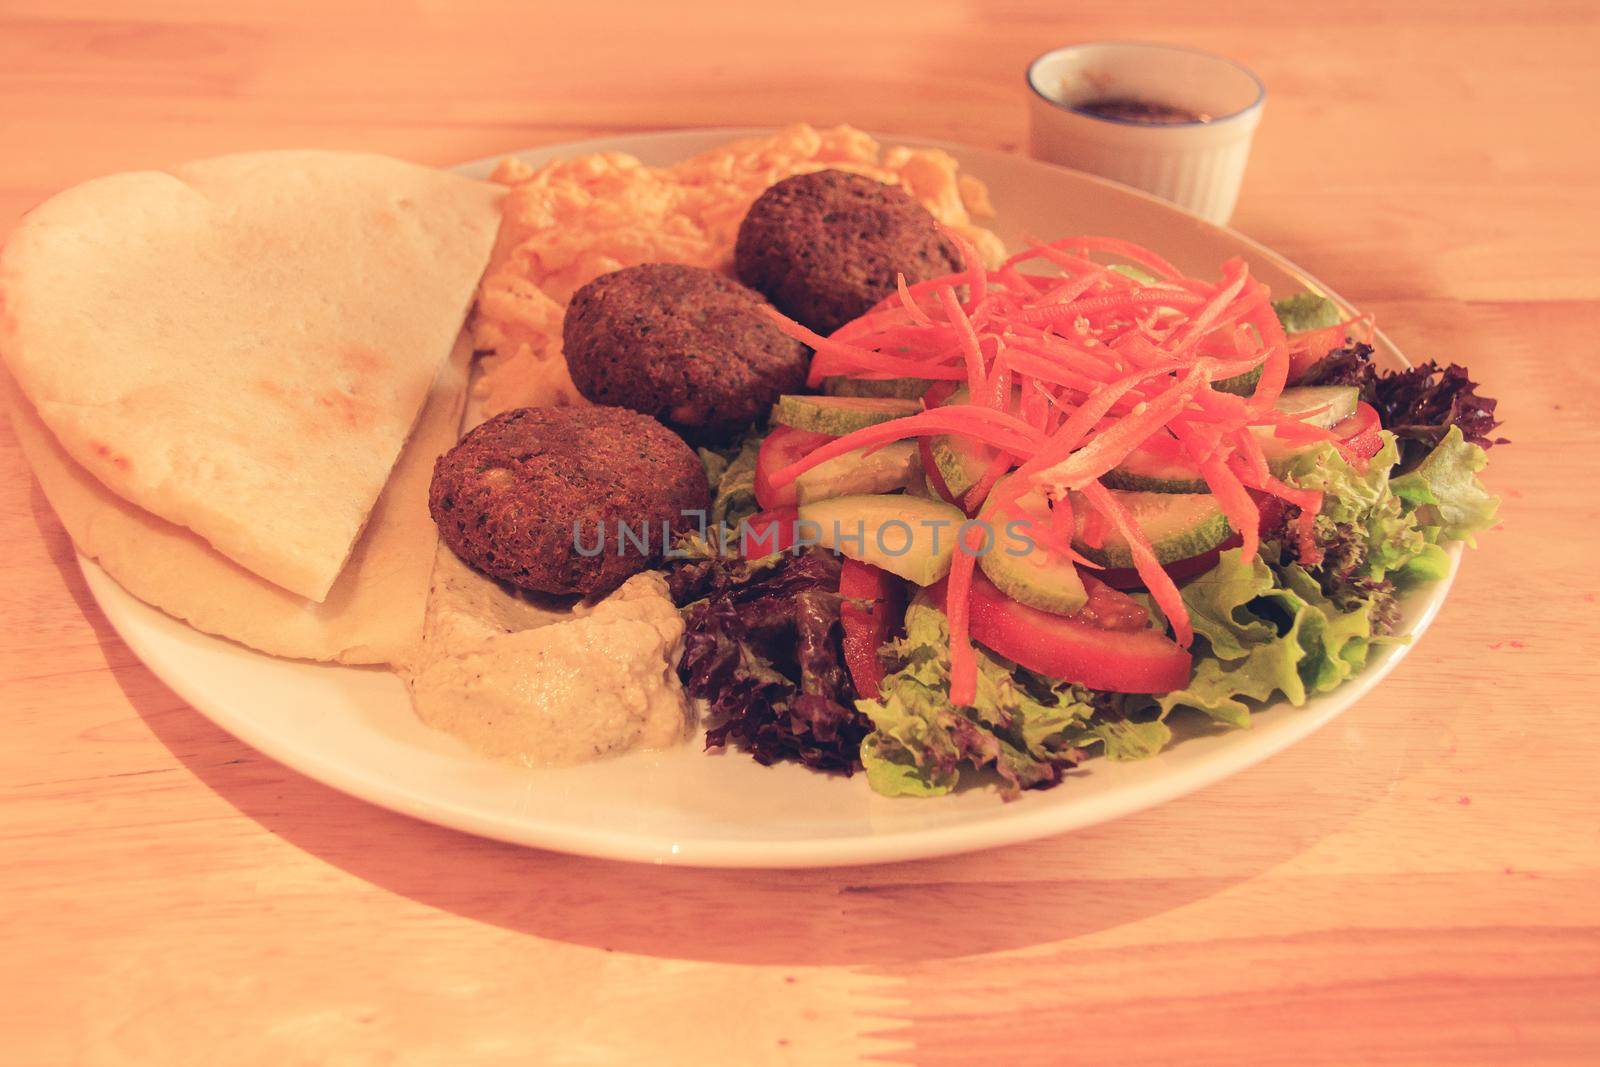 A plate full of falafel balls, pita bread, scrambled eggs and raw vegetable salad by Sonnet15